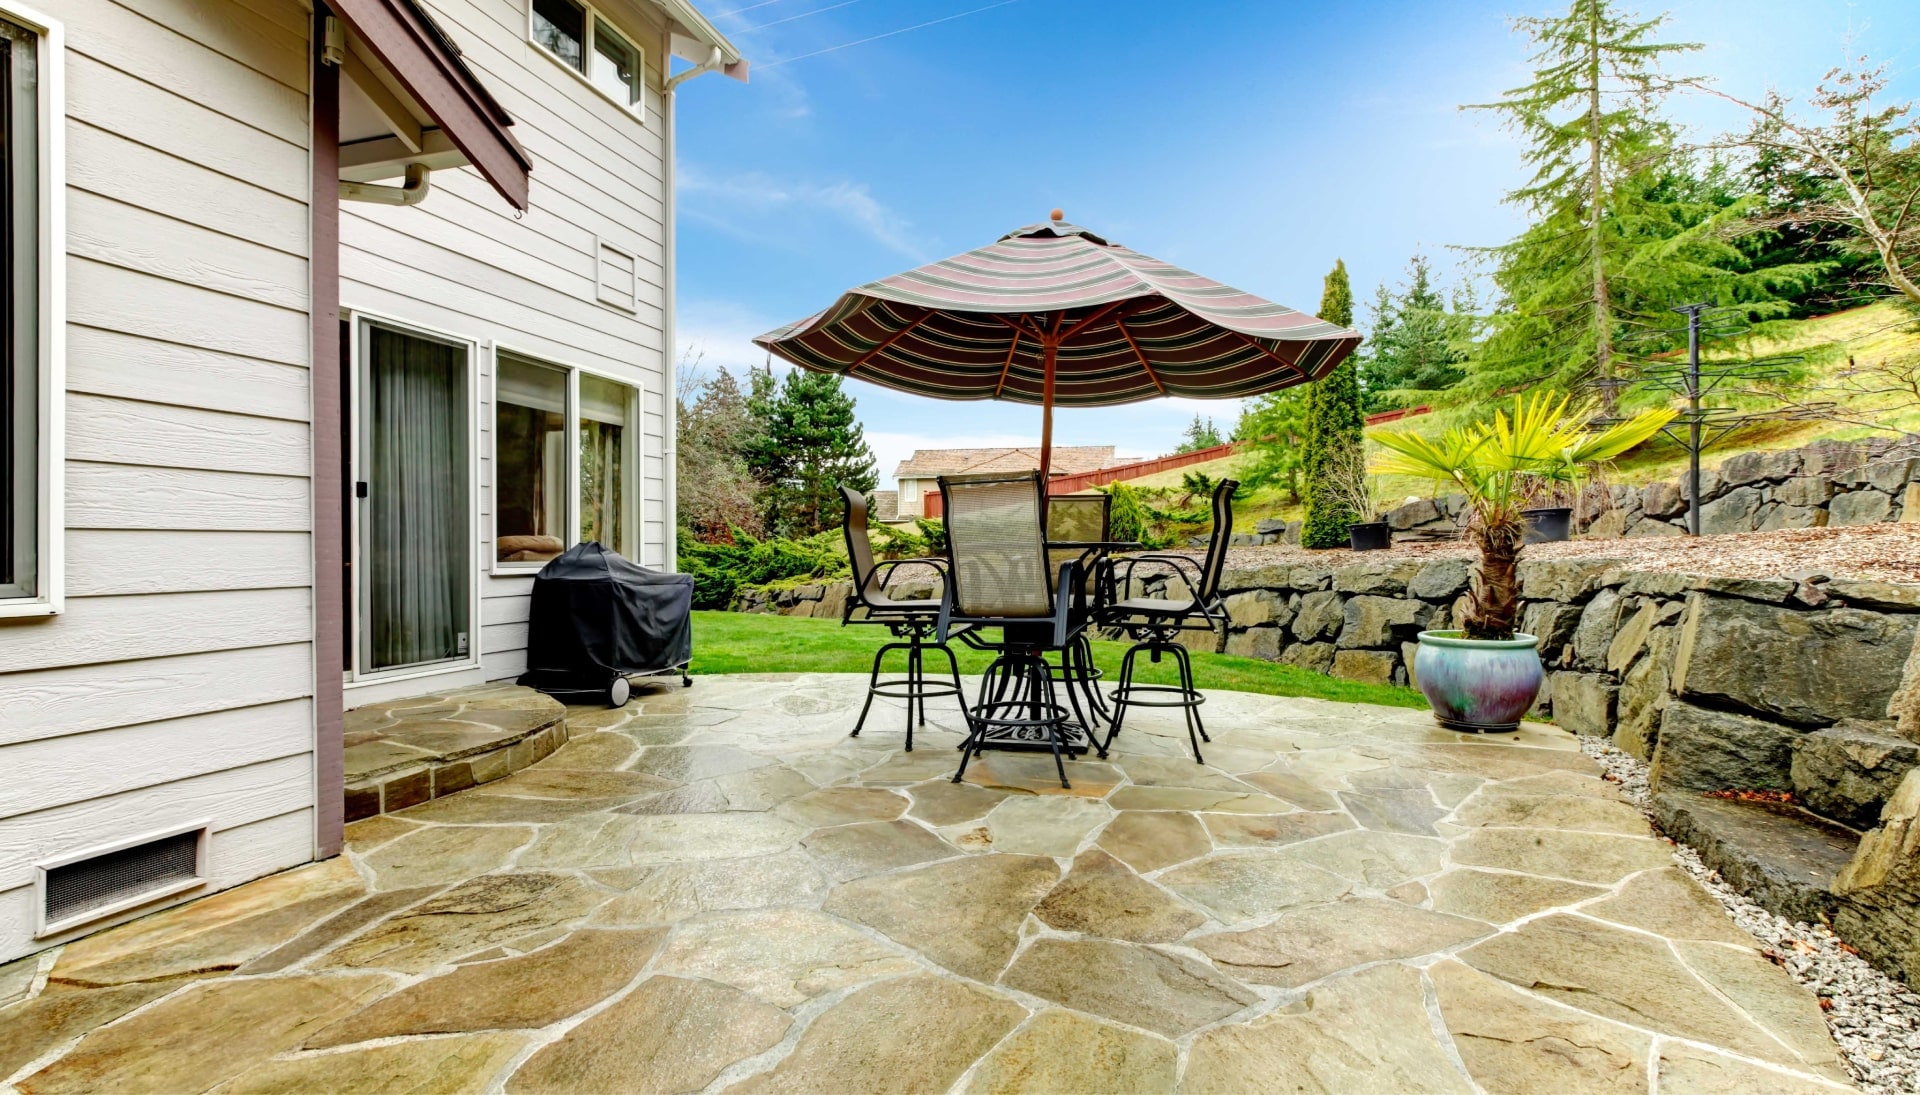 Beautifully Textured and Patterned Concrete Patios in Stockton, California area!